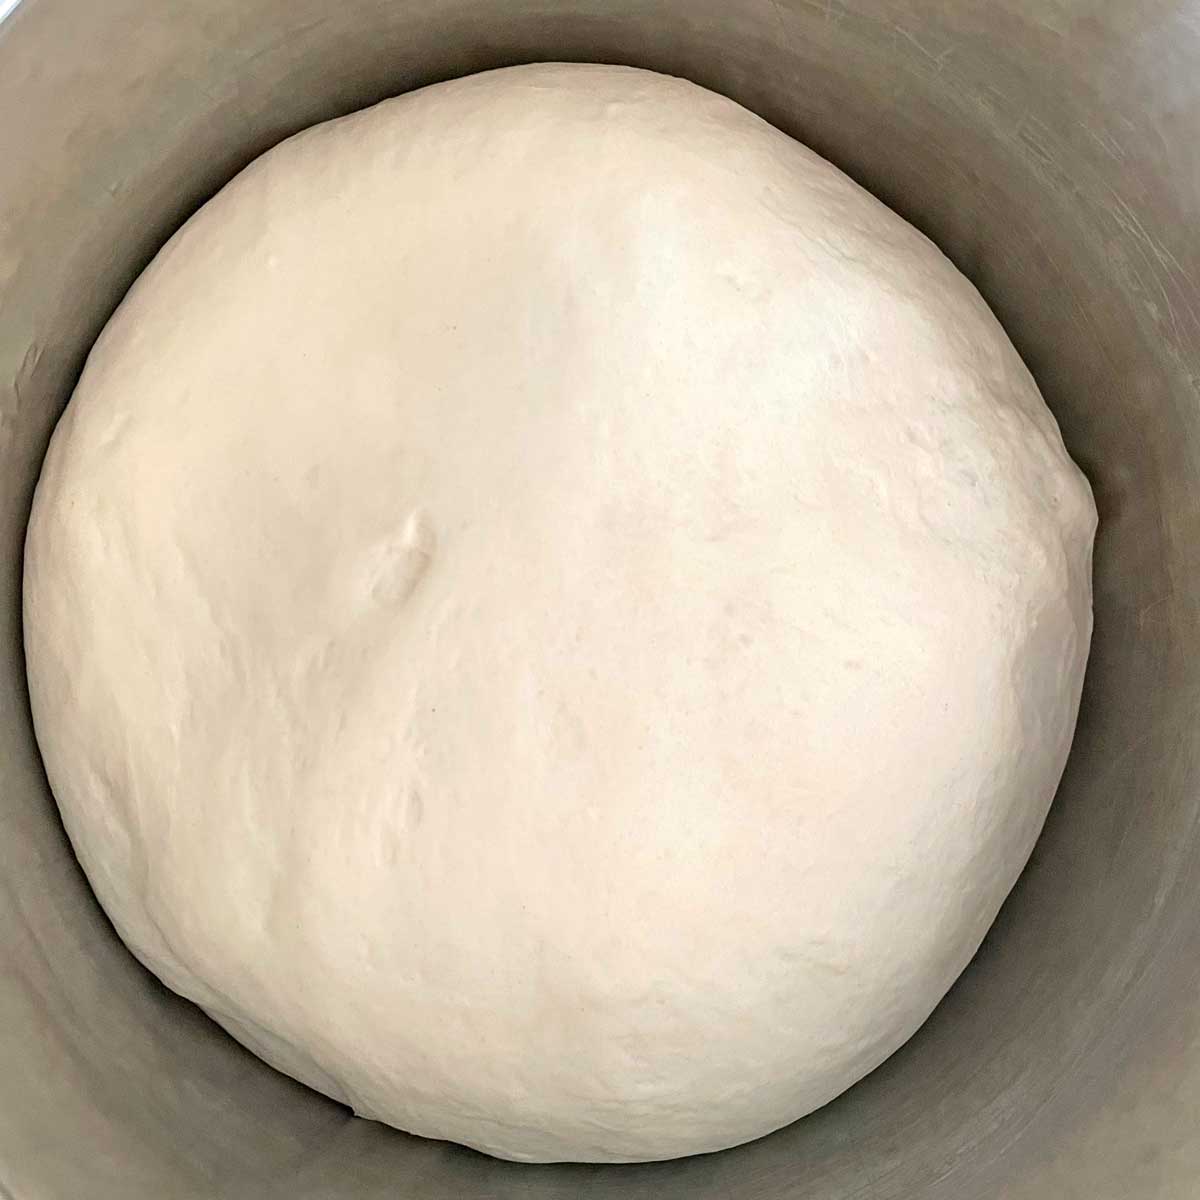 Pizza dough rise in a container.